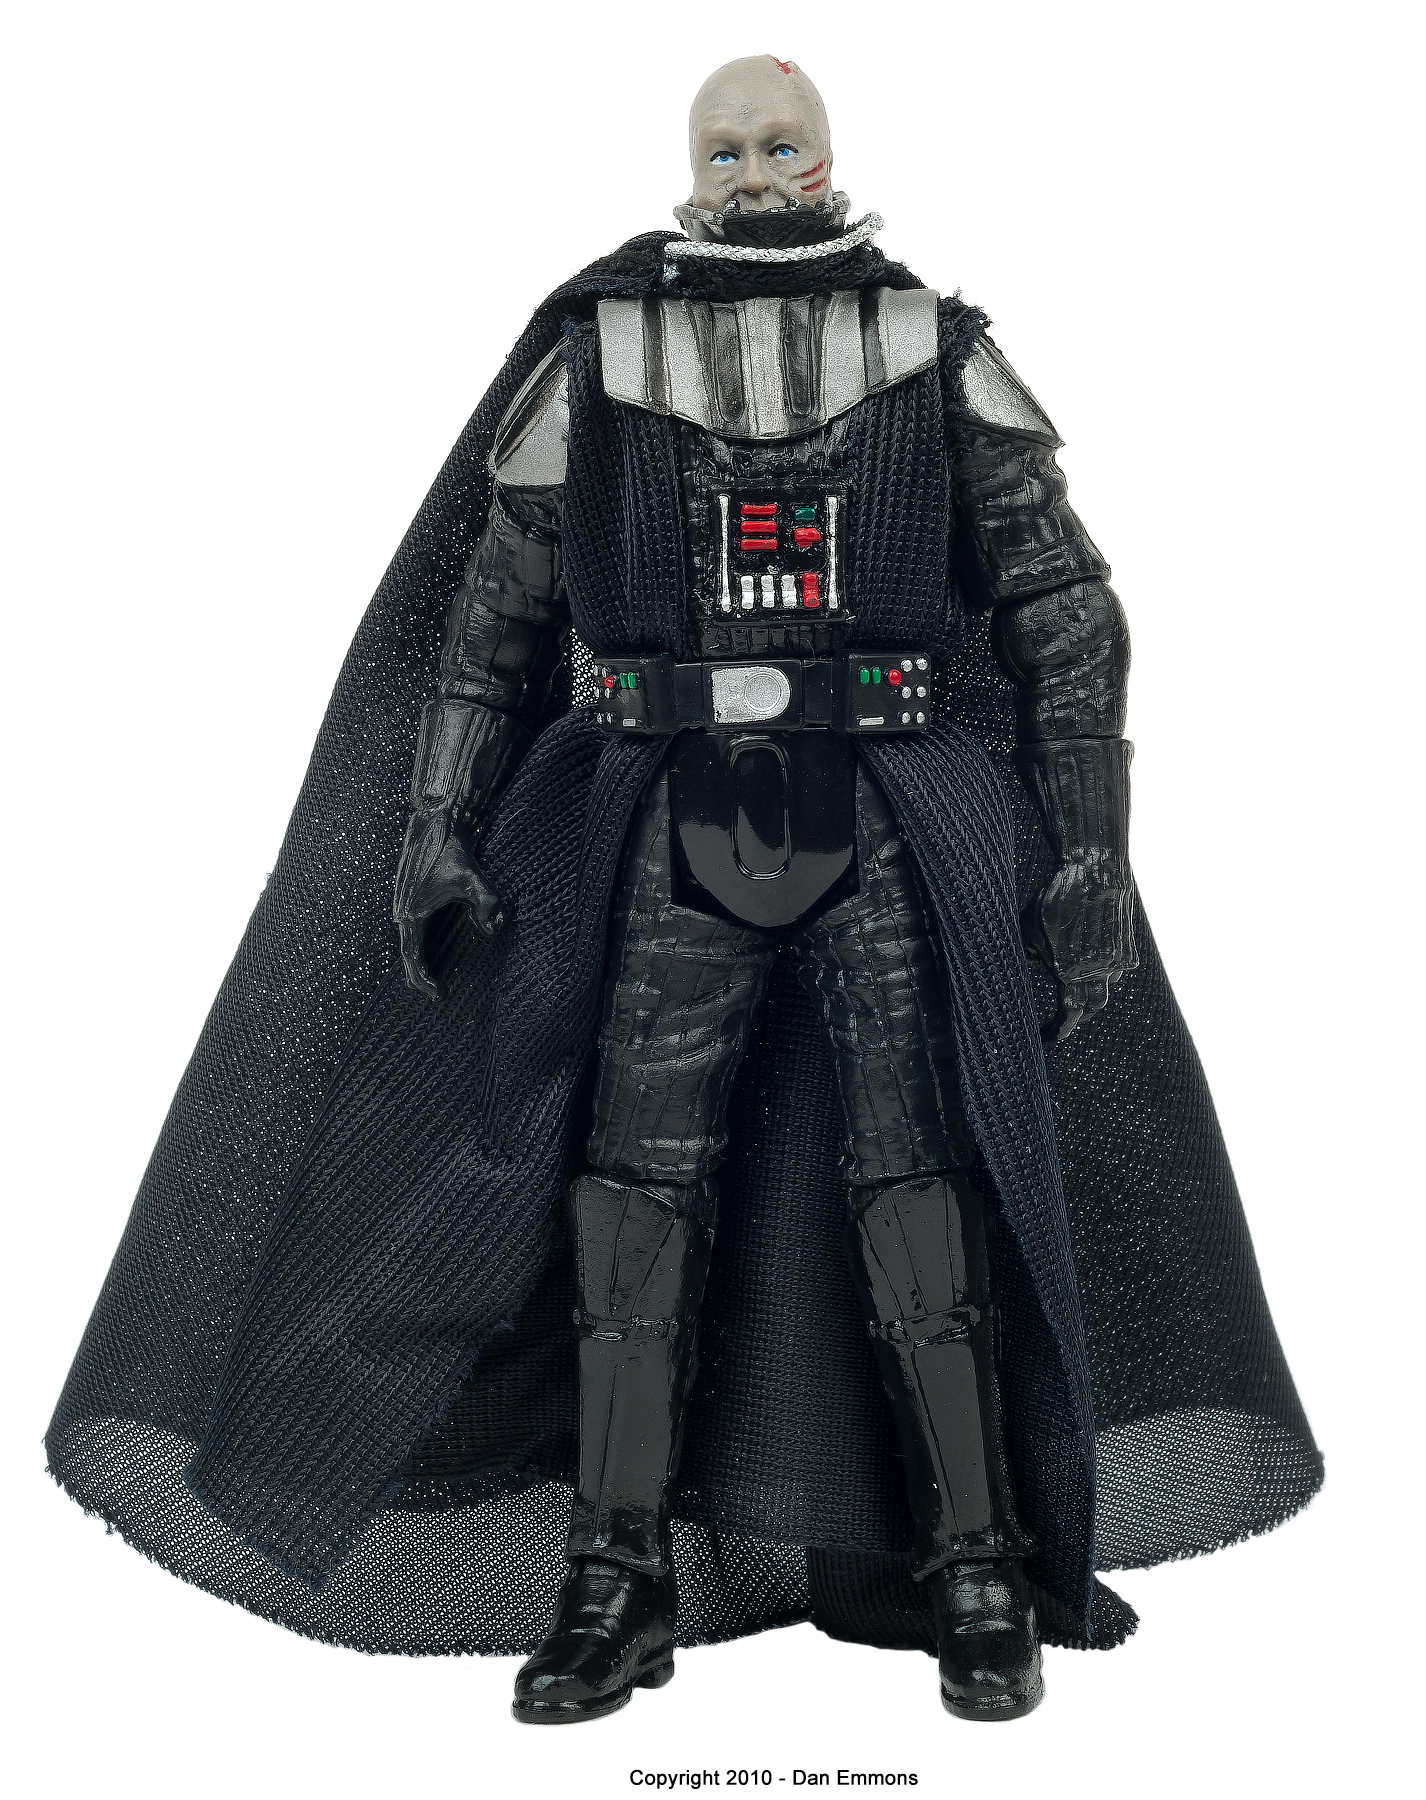 The Vintage Collection - VC08: Darth Vader